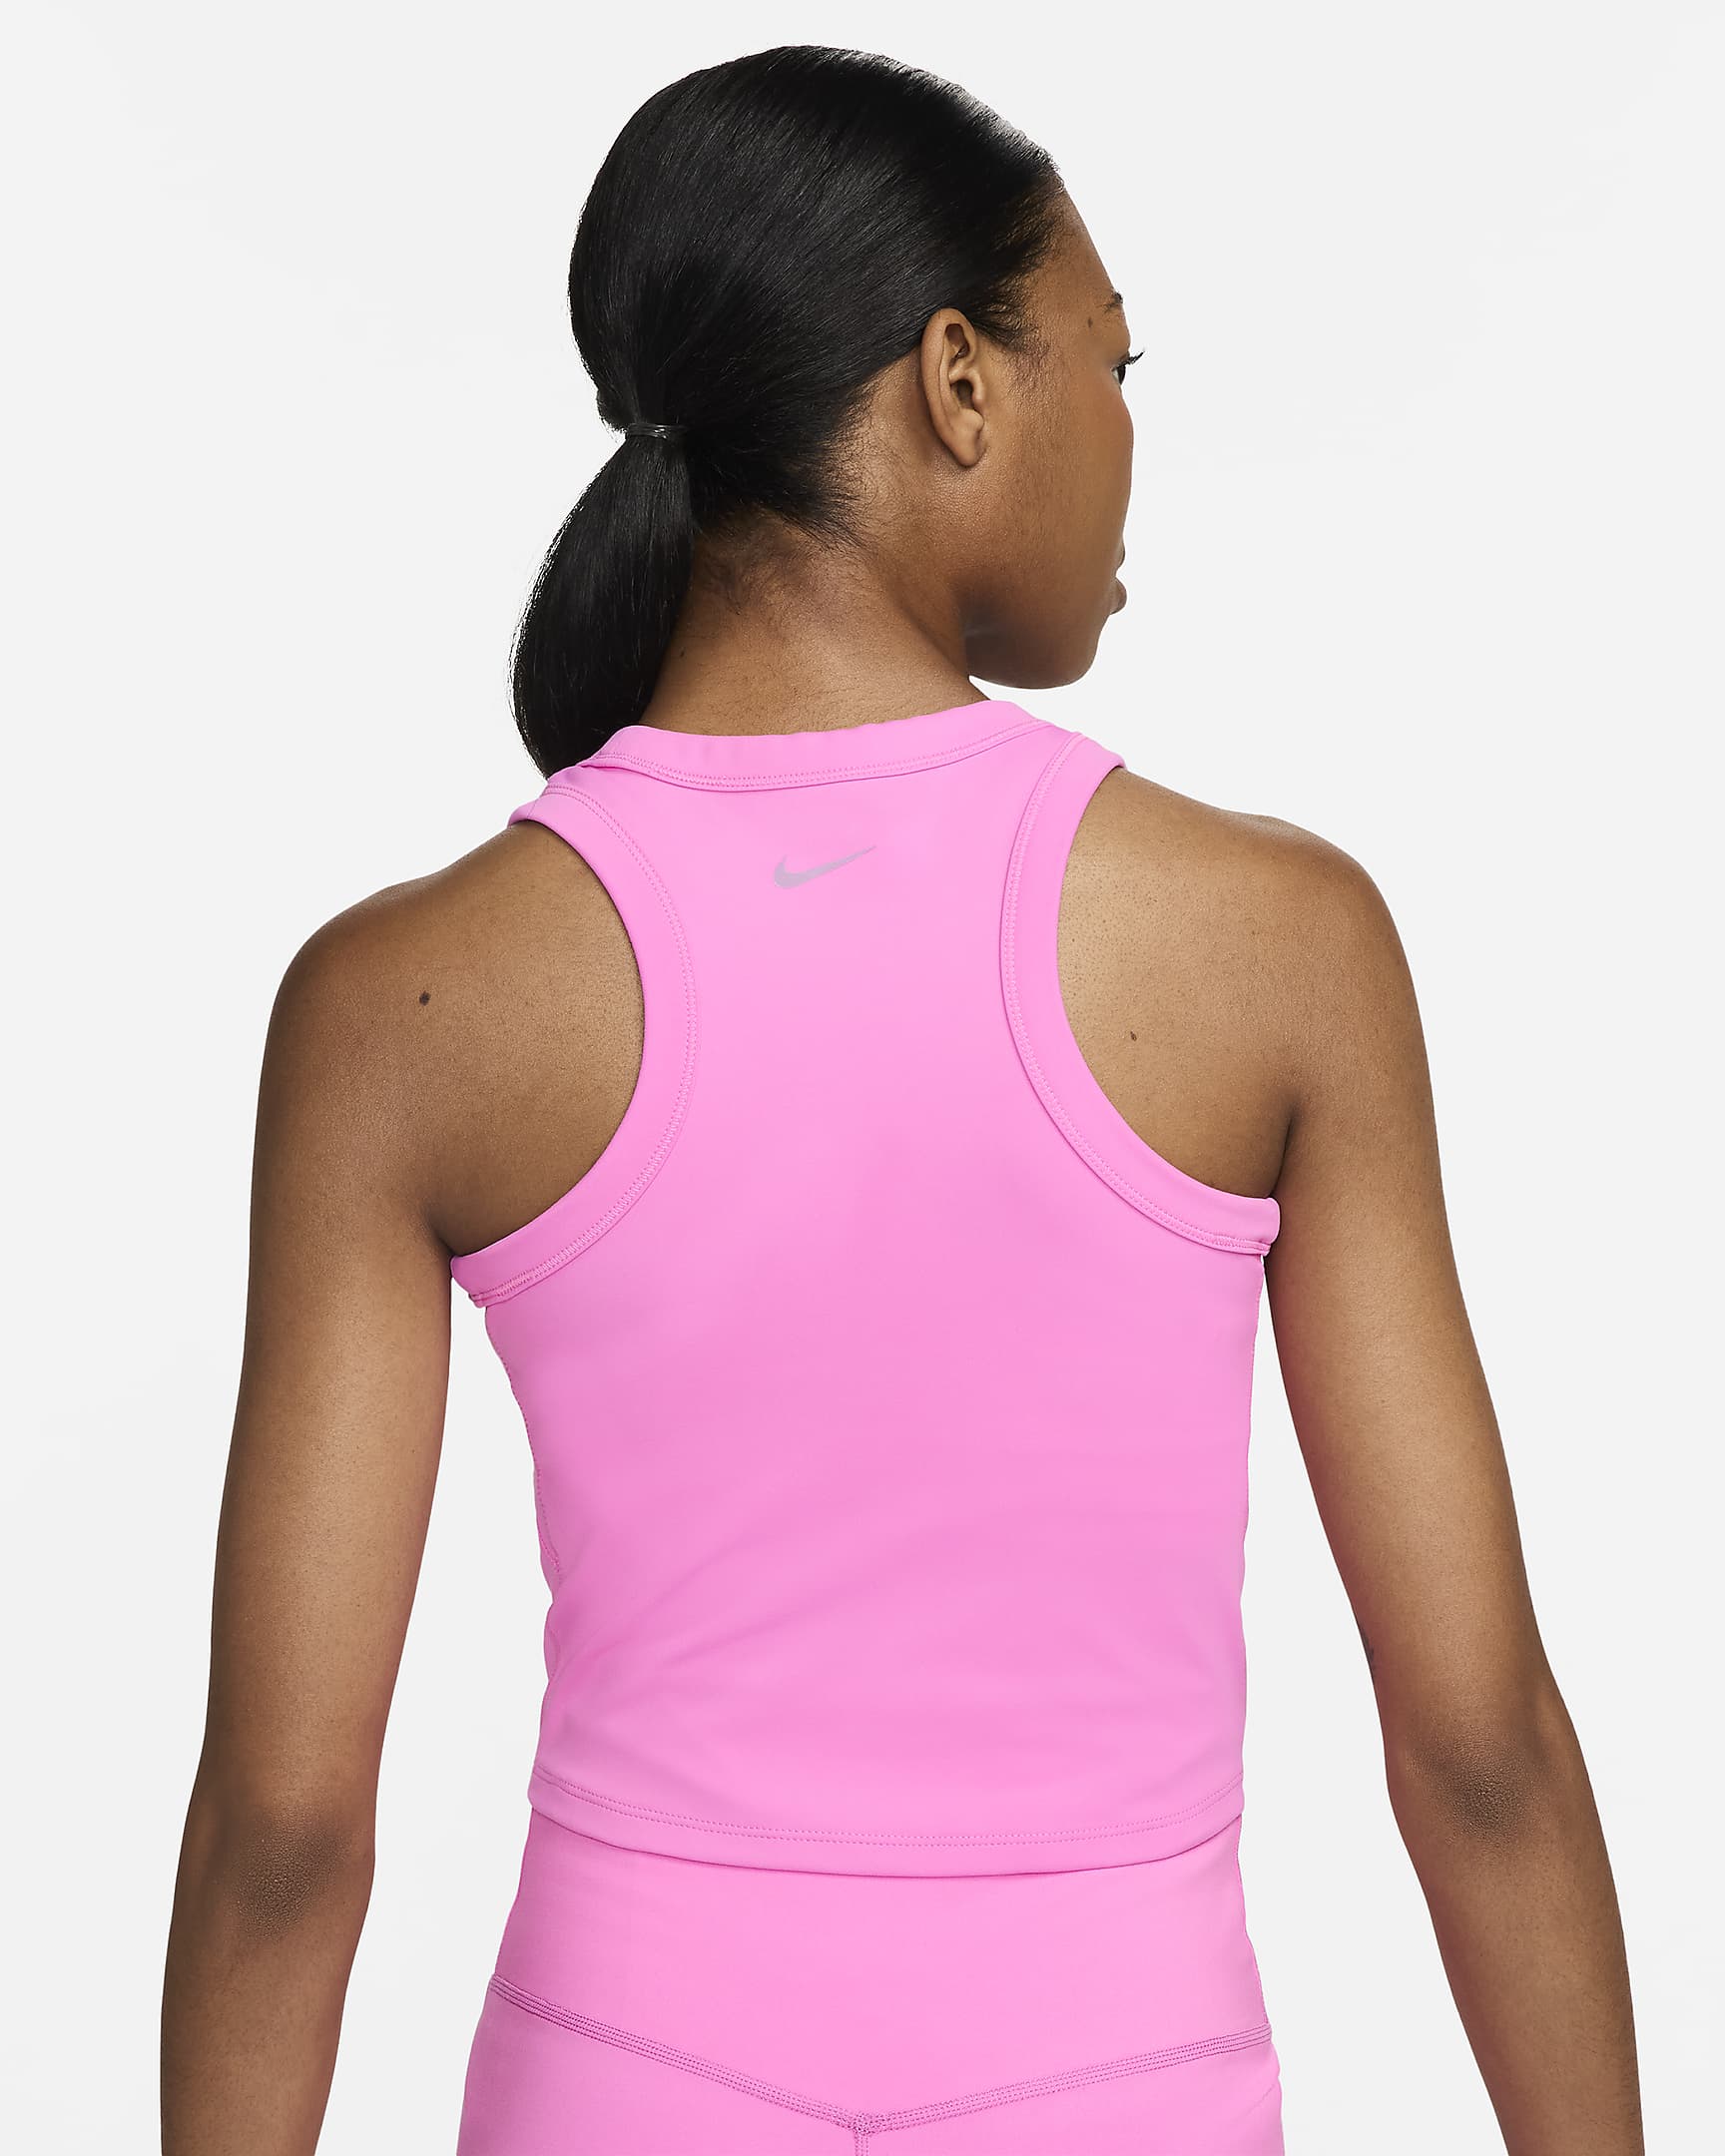 Nike One Fitted Women's Dri-FIT Cropped Tank Top - Playful Pink/Black